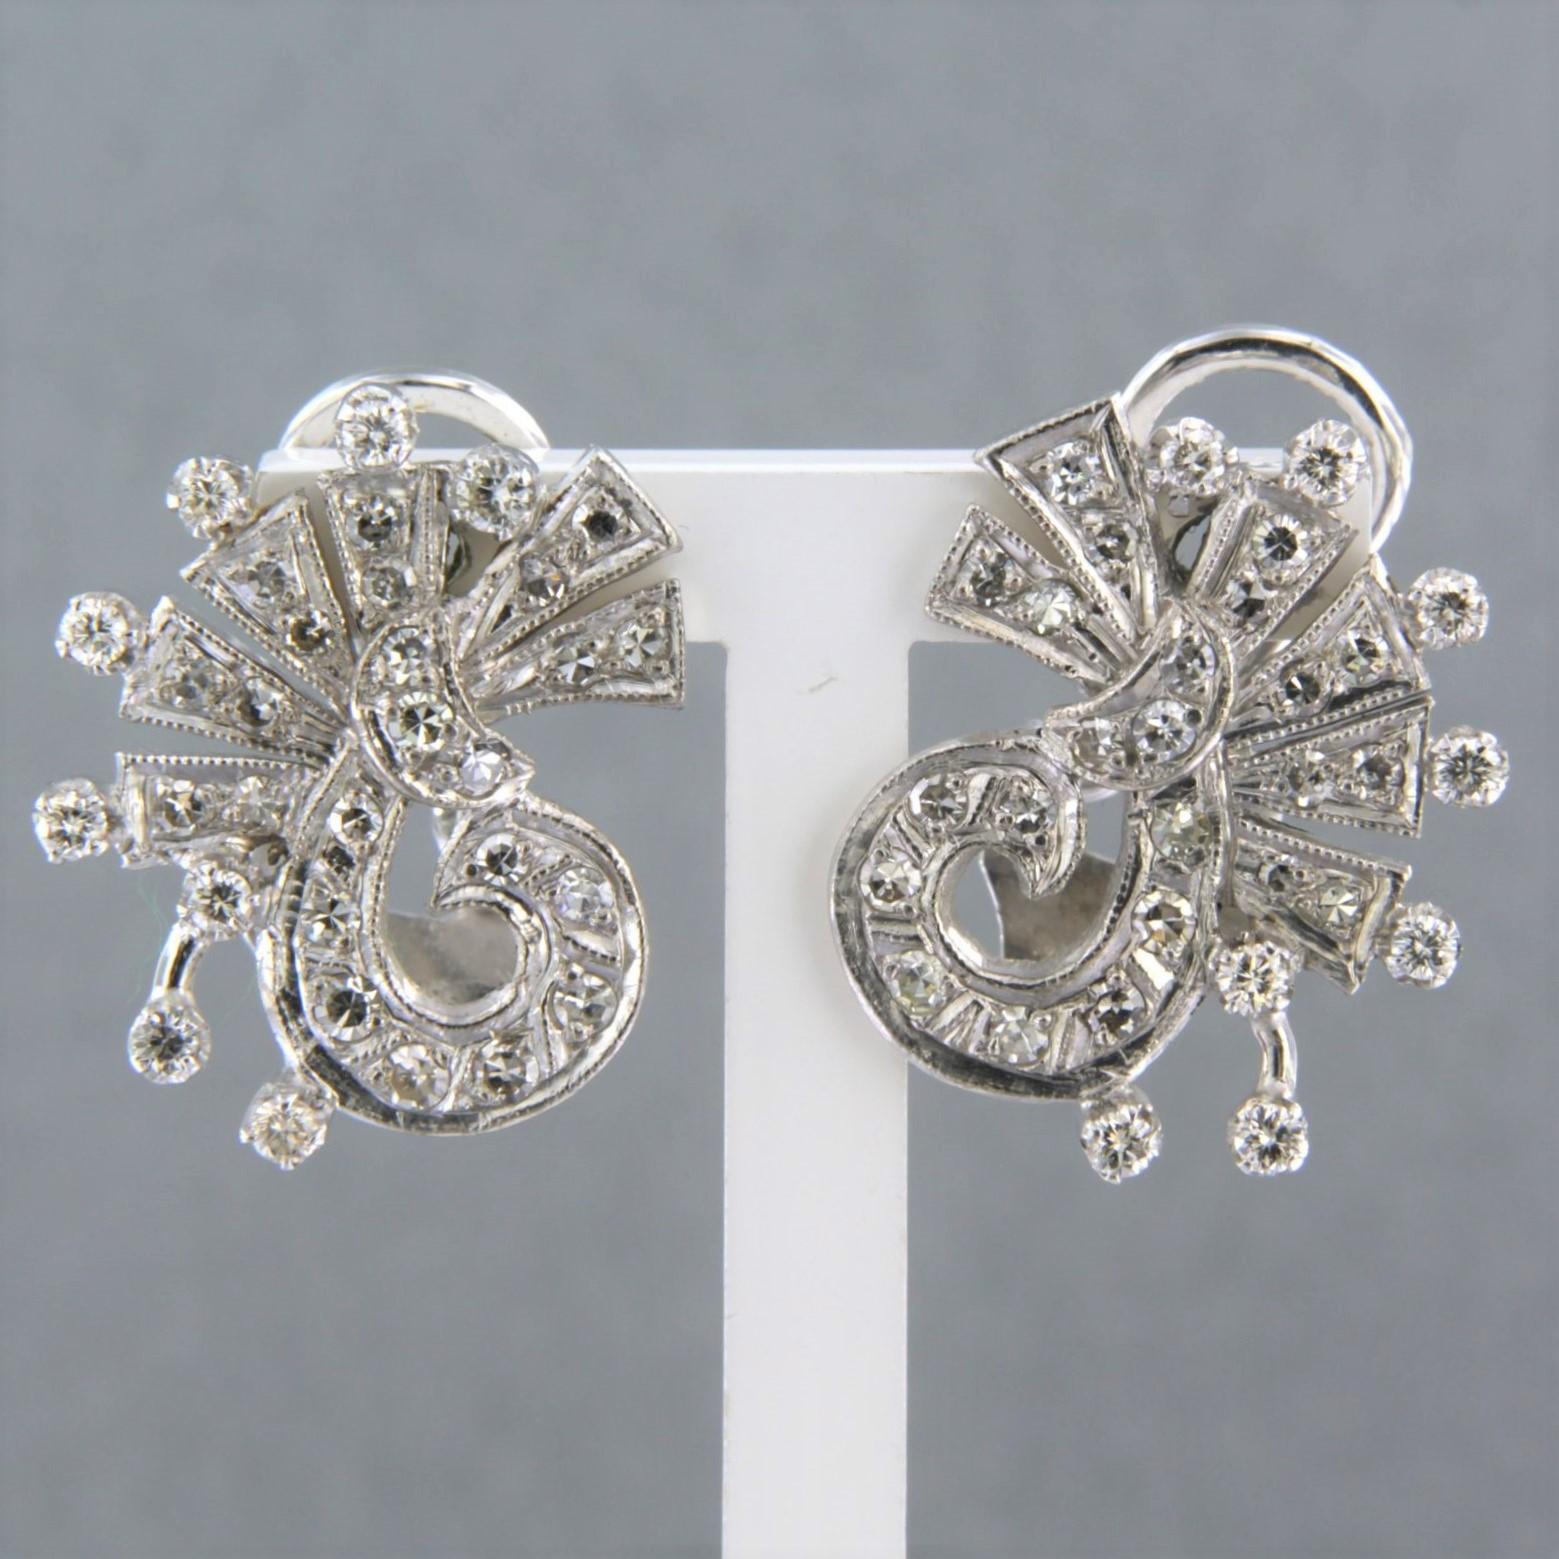 14k white gold clip-on earrings set with brilliant and single cut diamonds up to. 1.40ct - F/G - VS/SI

detailed description

Dimensions at the top of the ear clips are 2 cm x 1.5 cm, closure is a clip closure with a pin

weight 8.5 grams

occupied